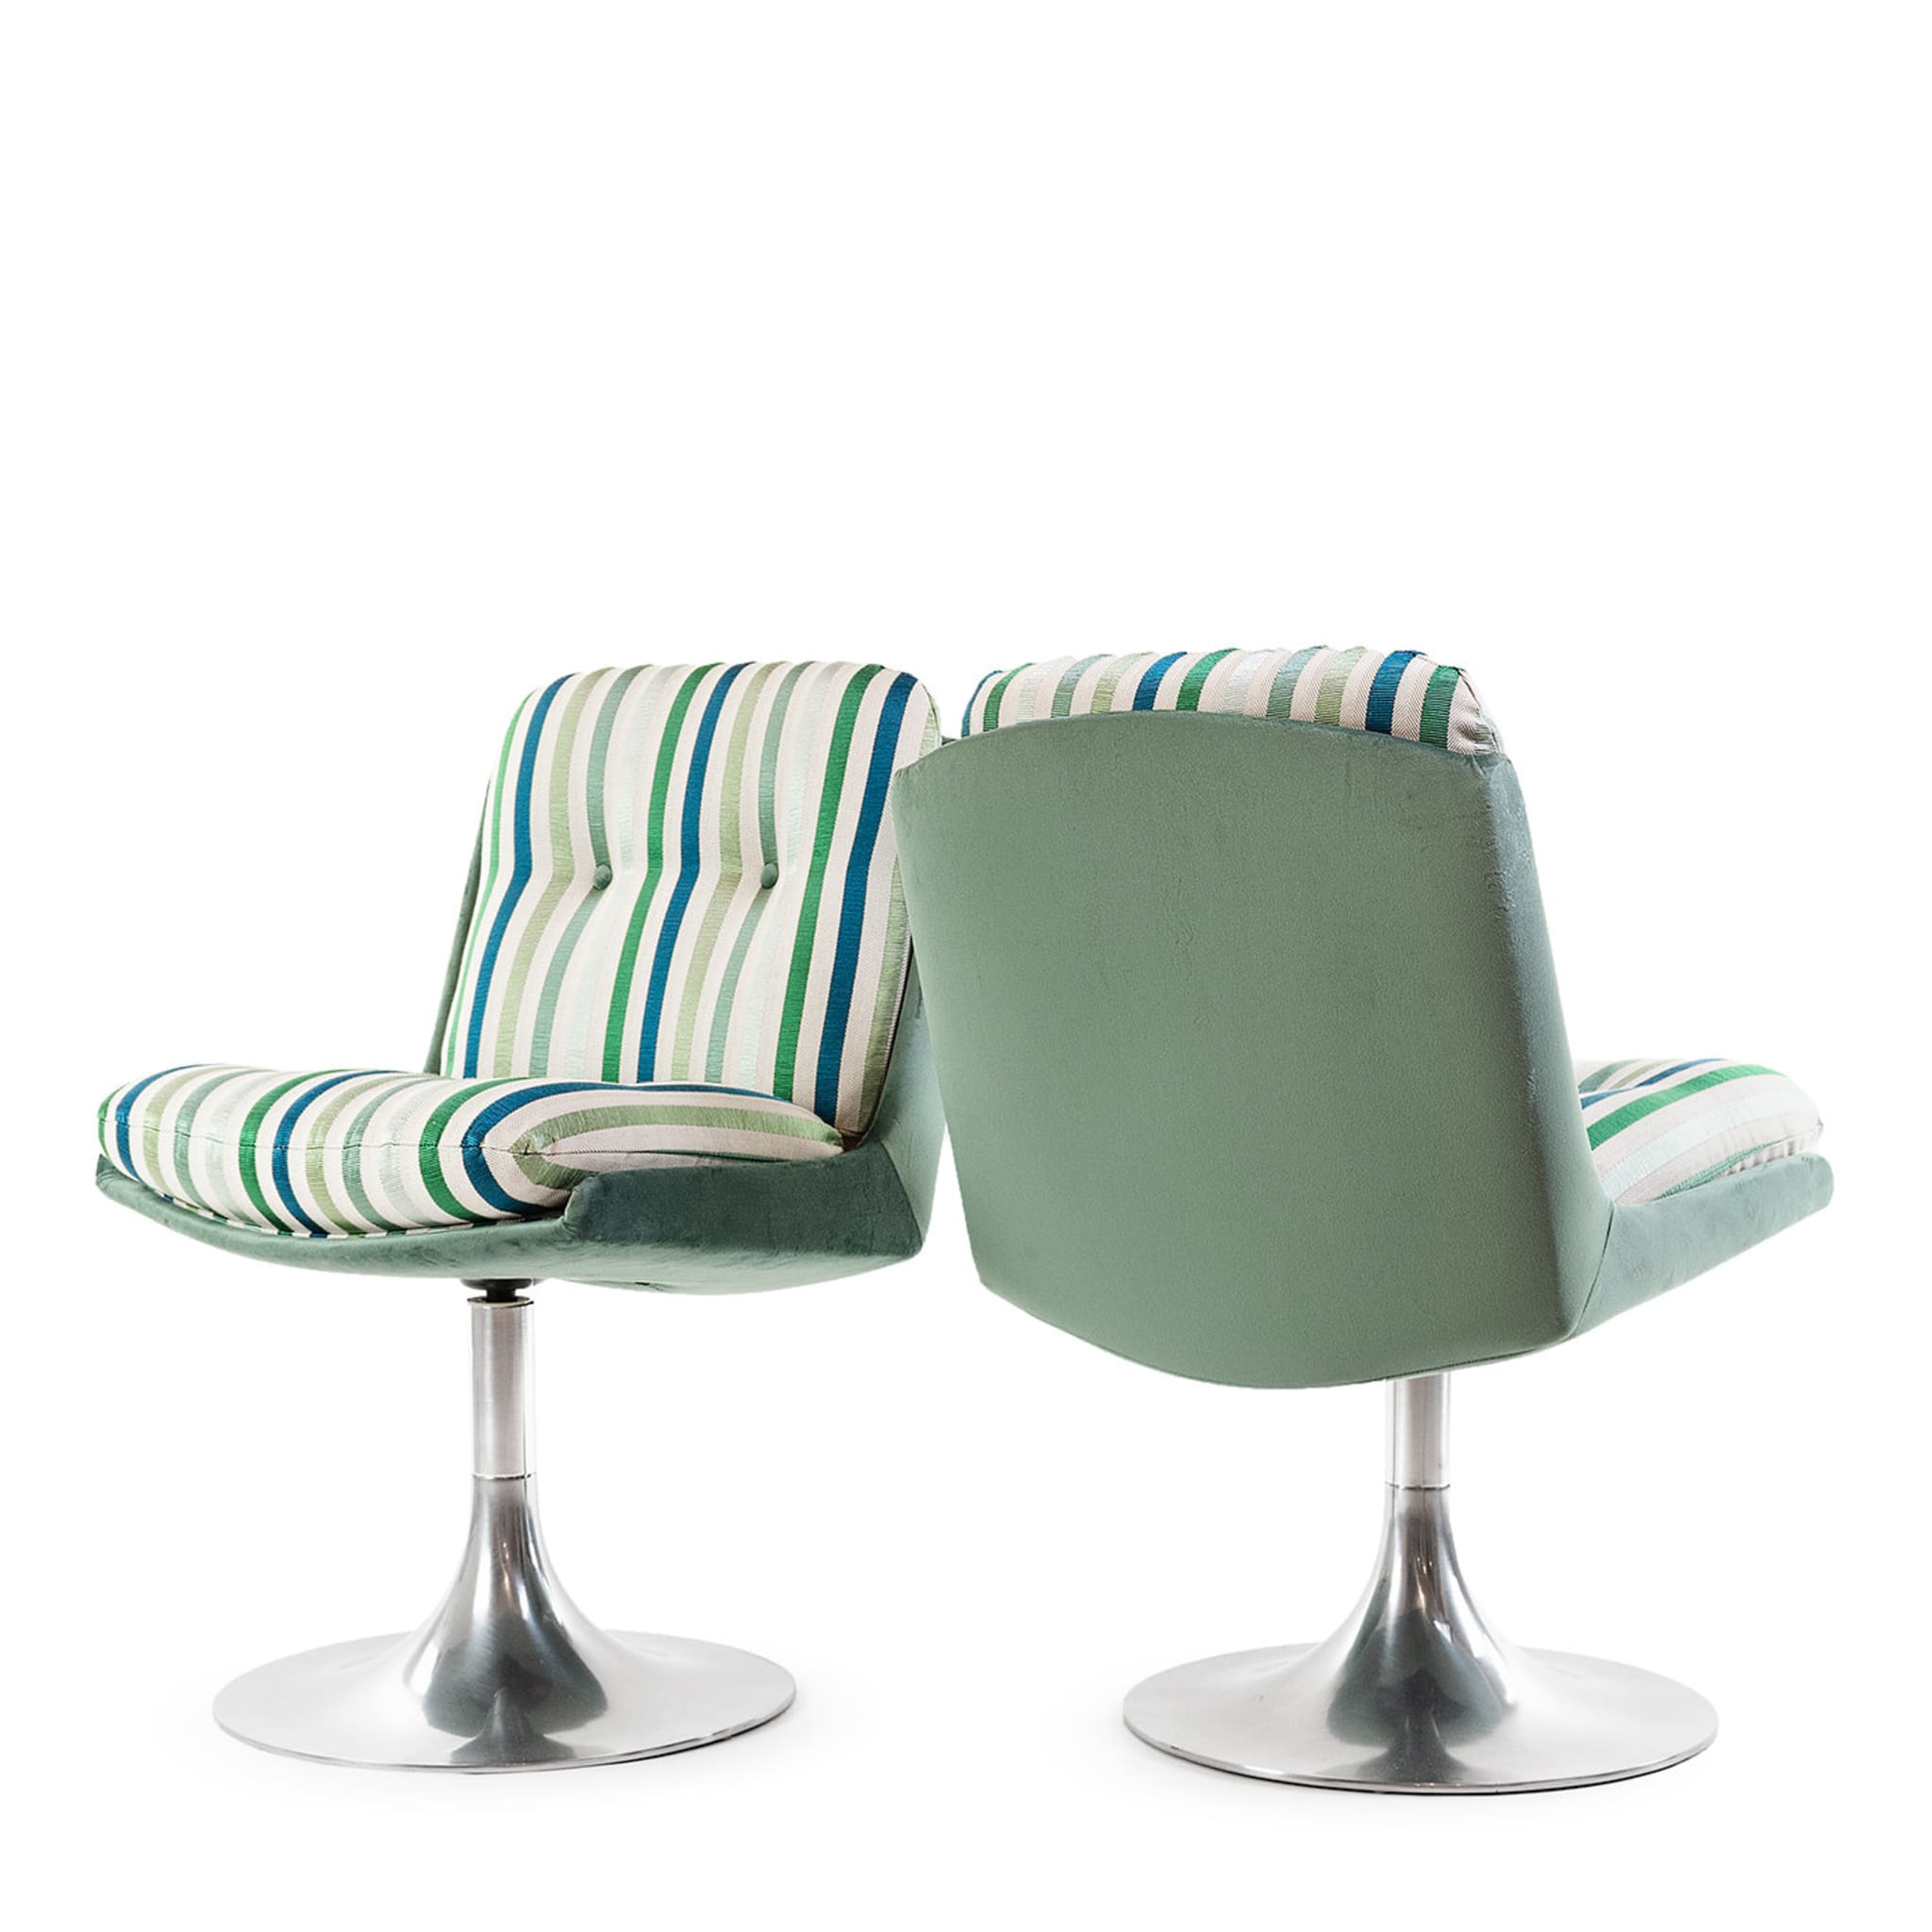 Trophies Set of 2 Pedestal Chairs  - Alternative view 2